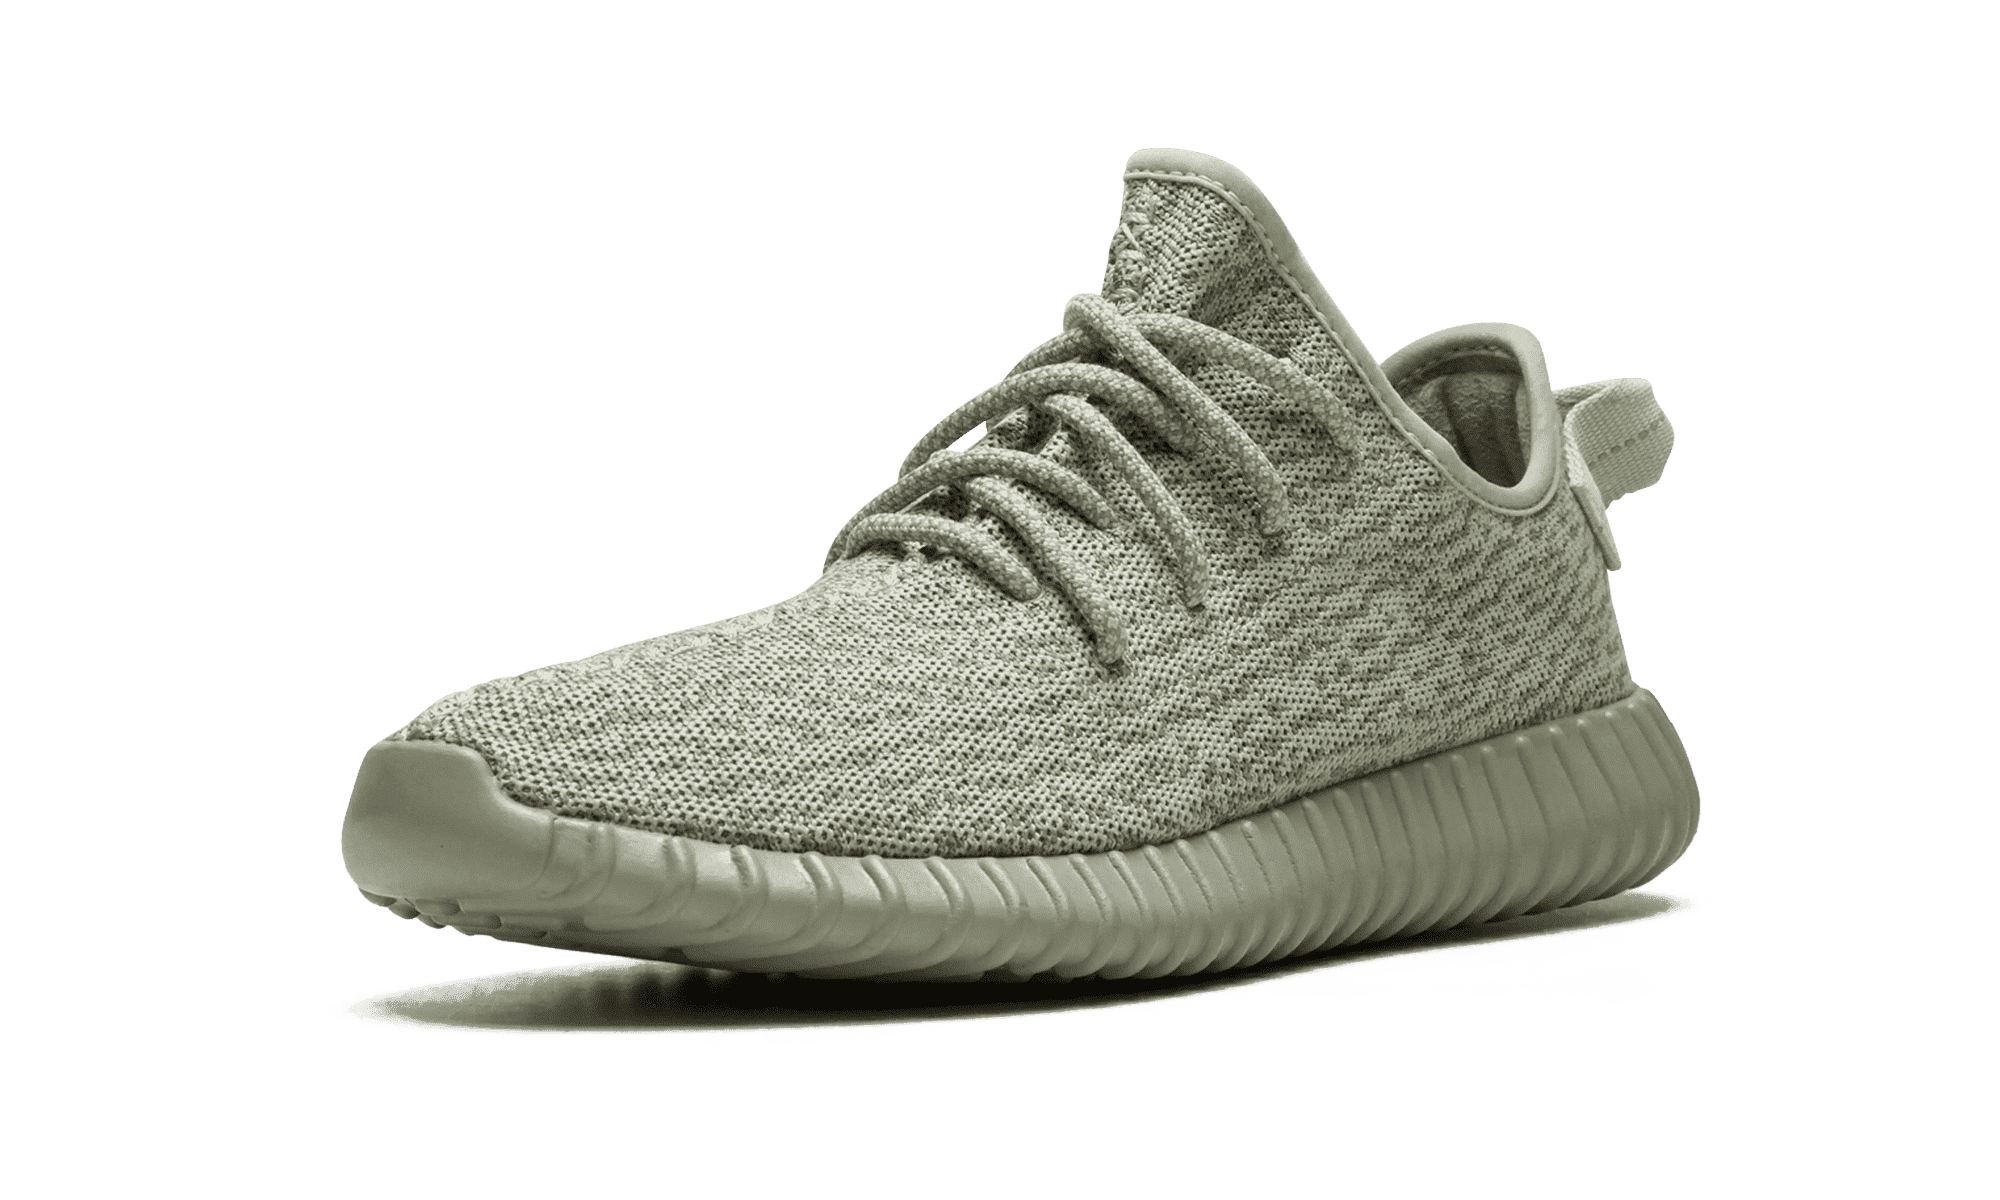 Adidas Yeezy Boost 350 V2 Moonrock Online Sale, UP TO 62% OFF